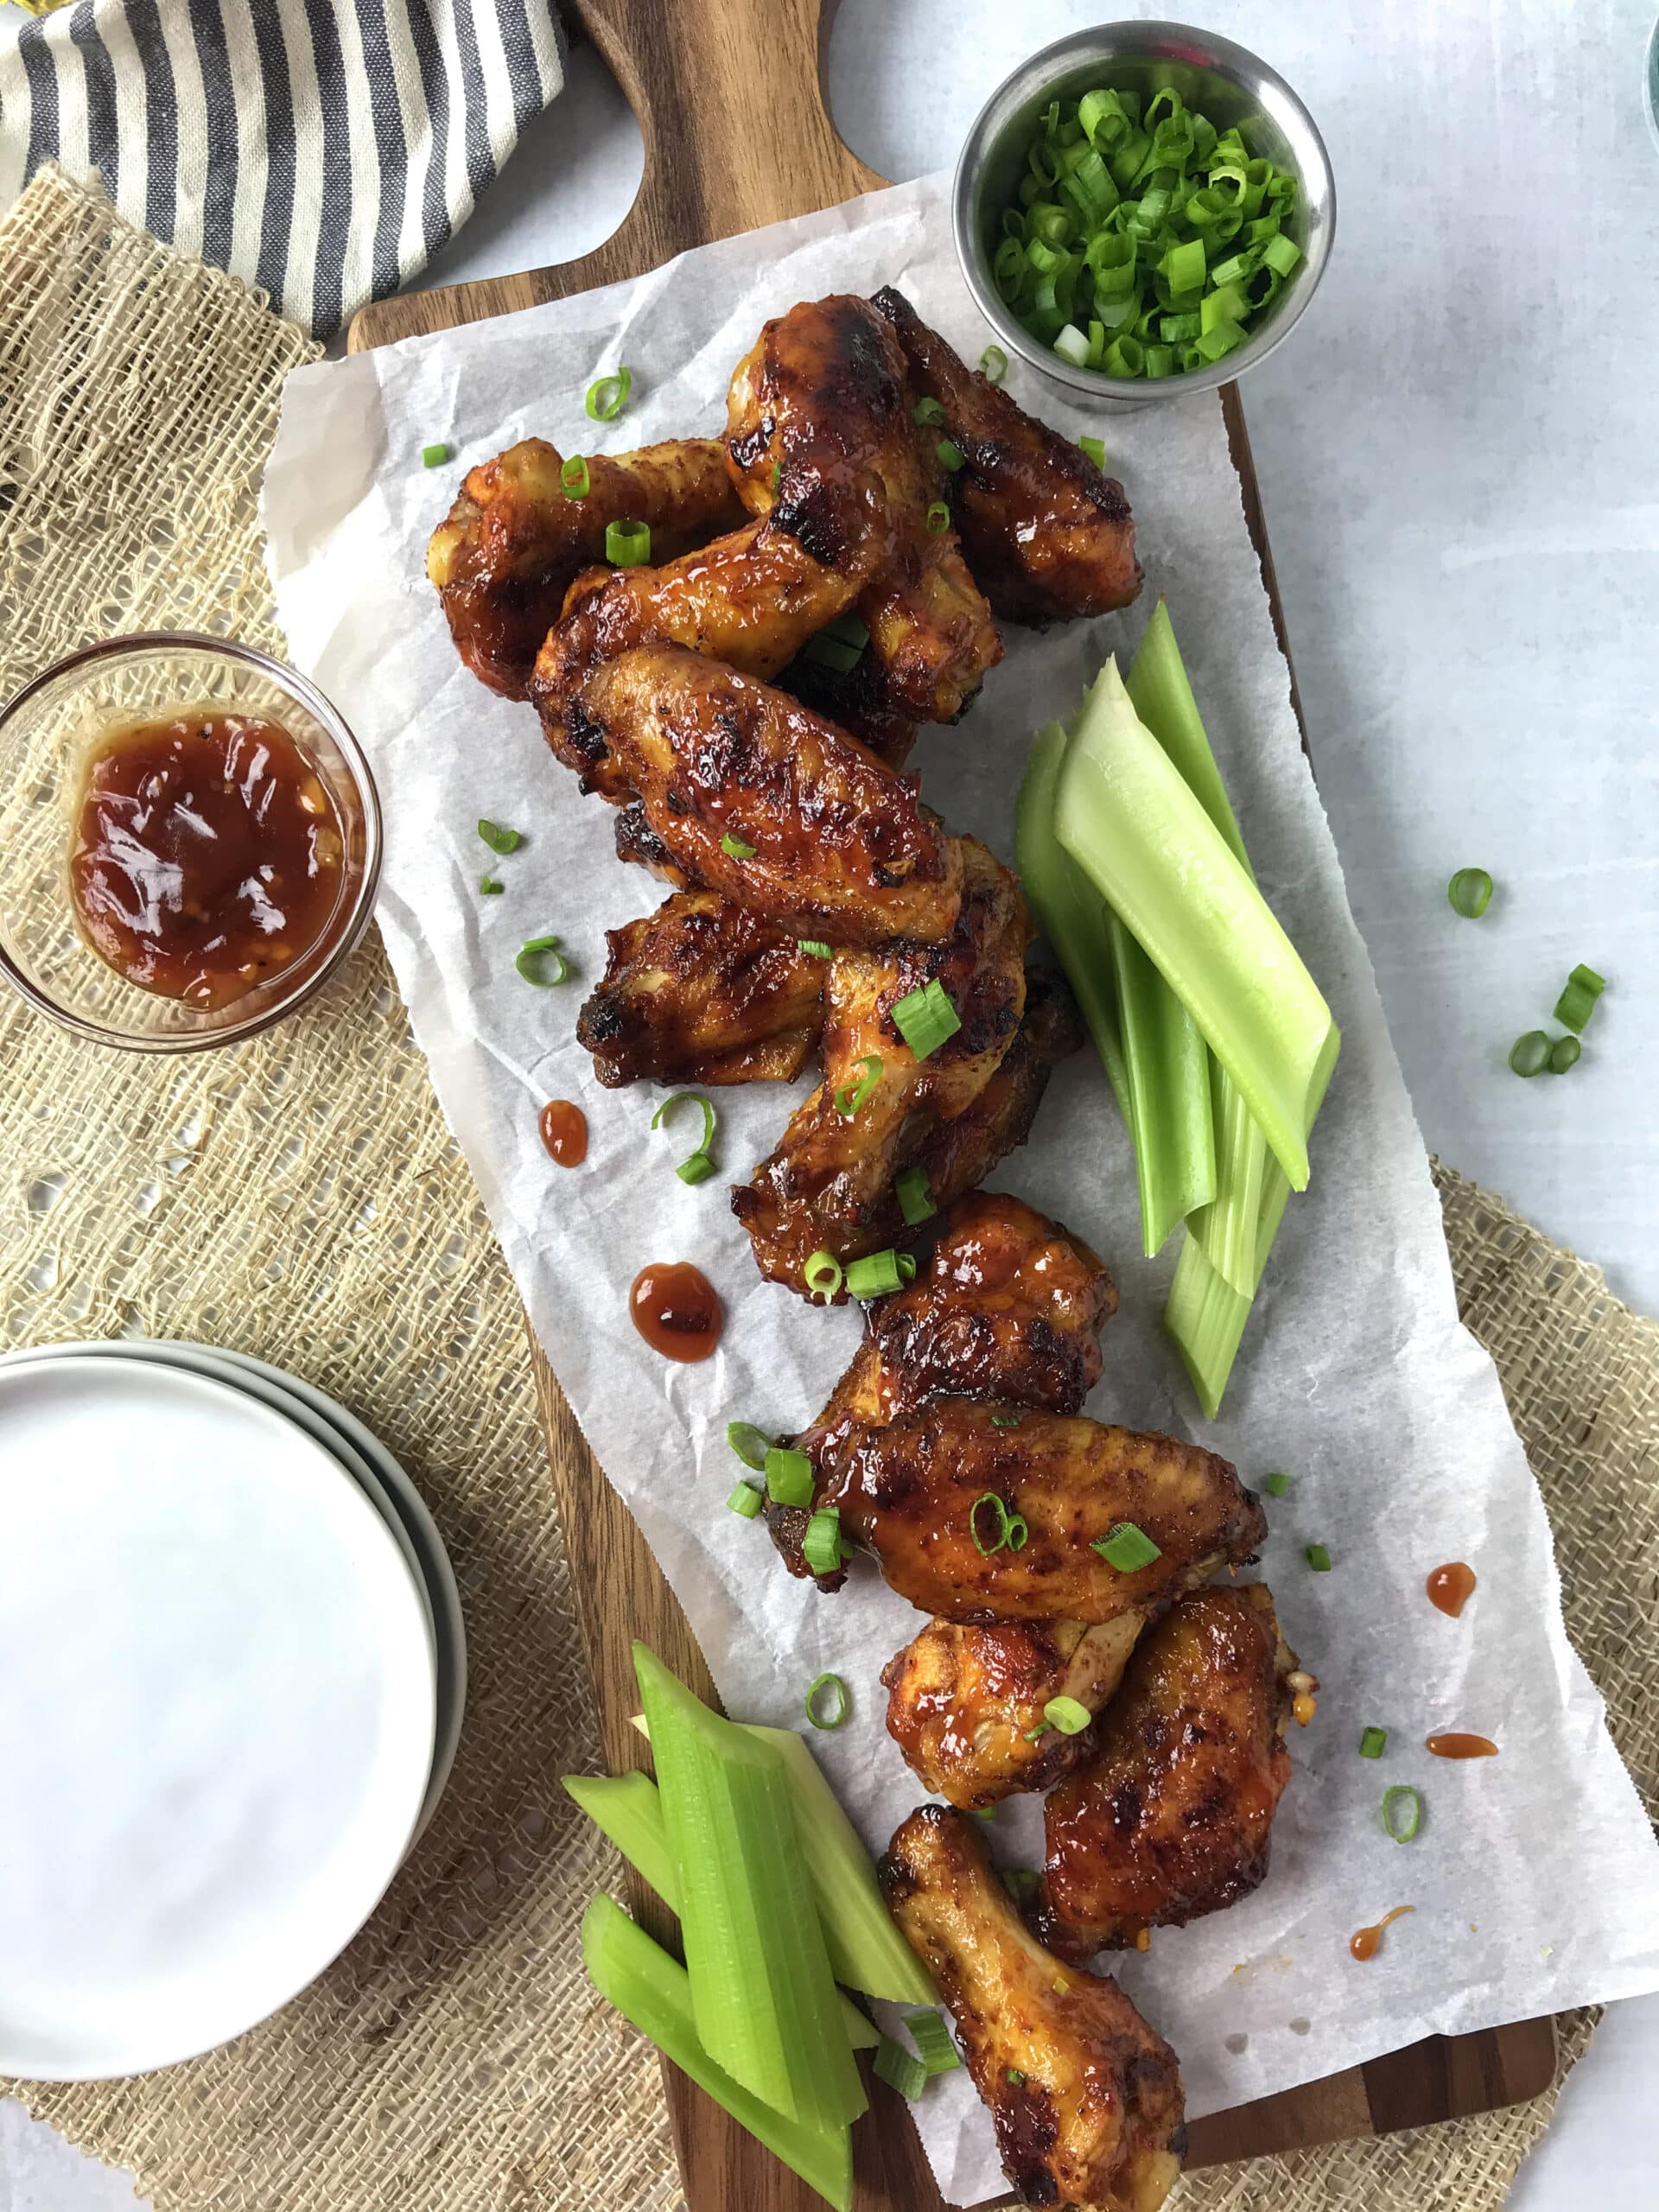 Chicken wings on a cutting board with celery.